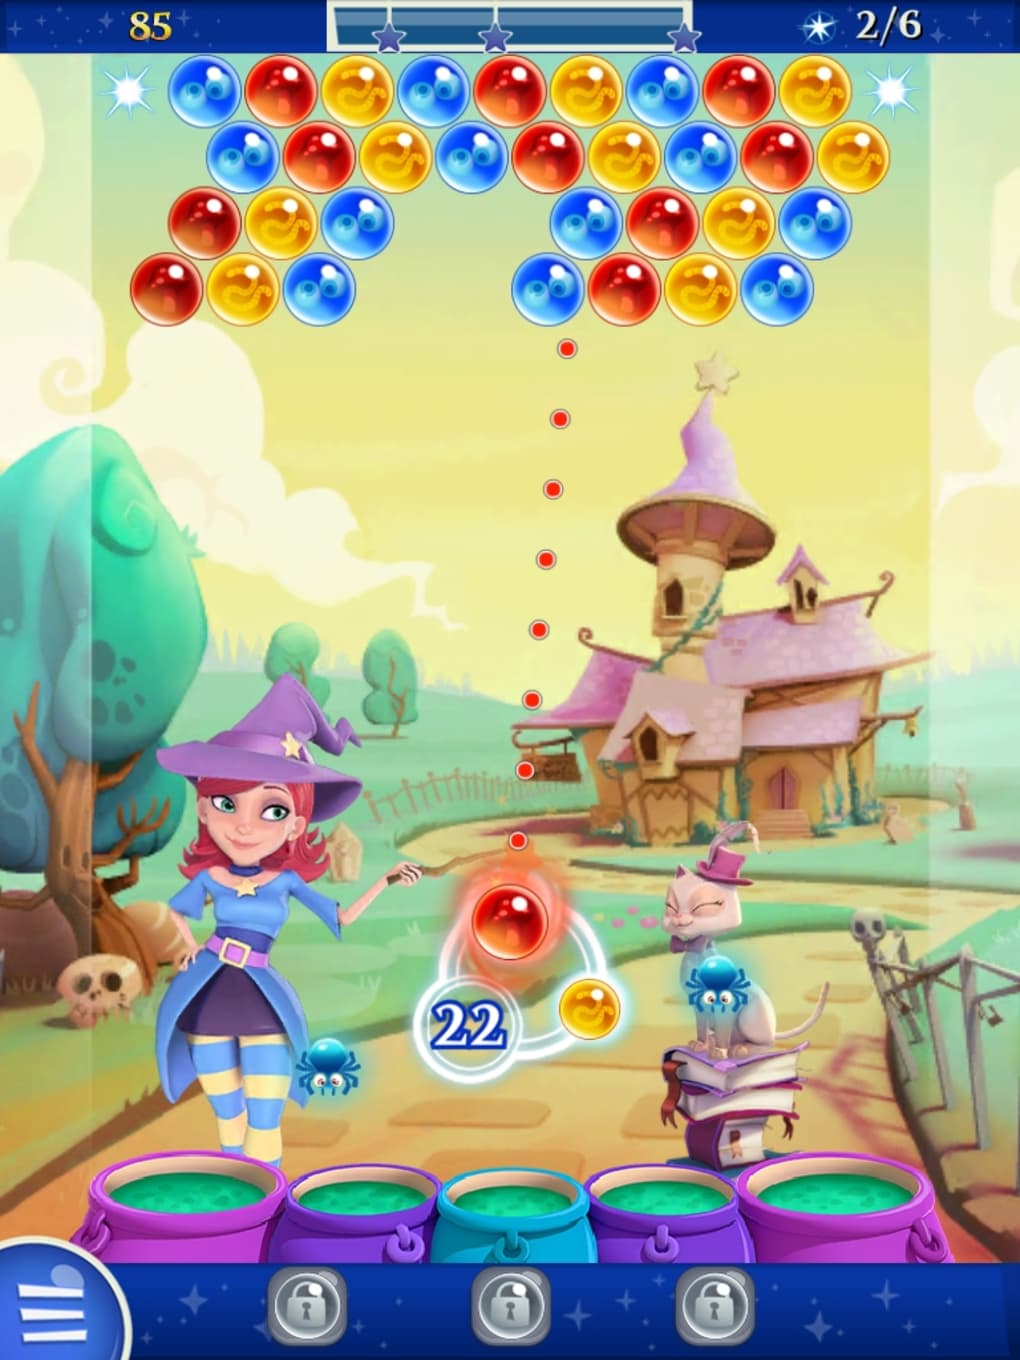 Bubble Witch 2 Saga - Apps on Google Play